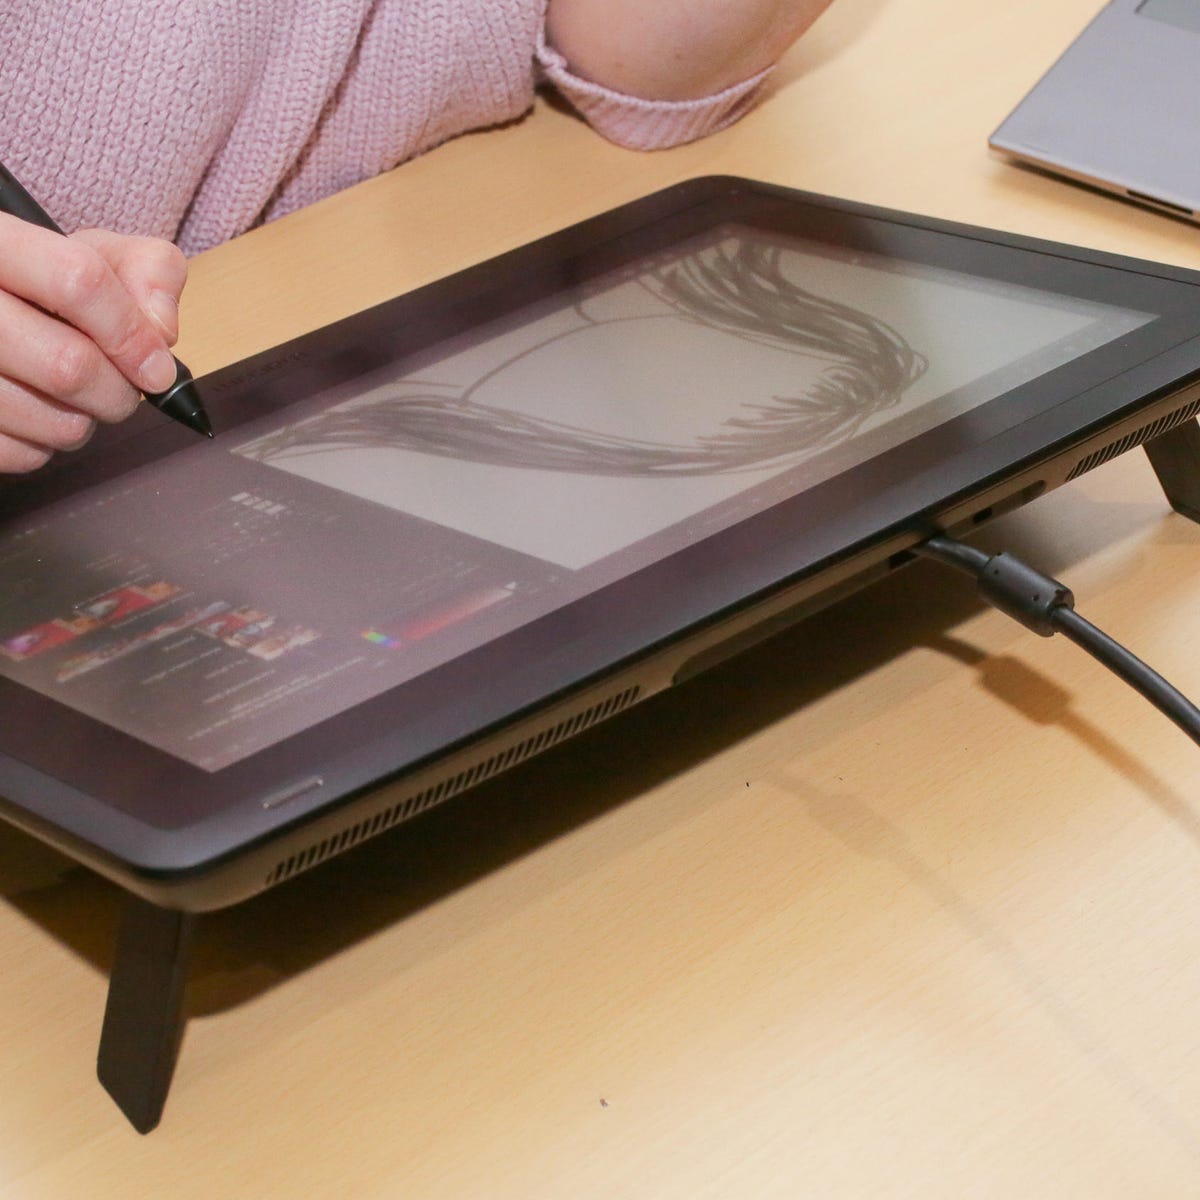 Wacom's entry Cintiq 16 display for artists on a budget CNET